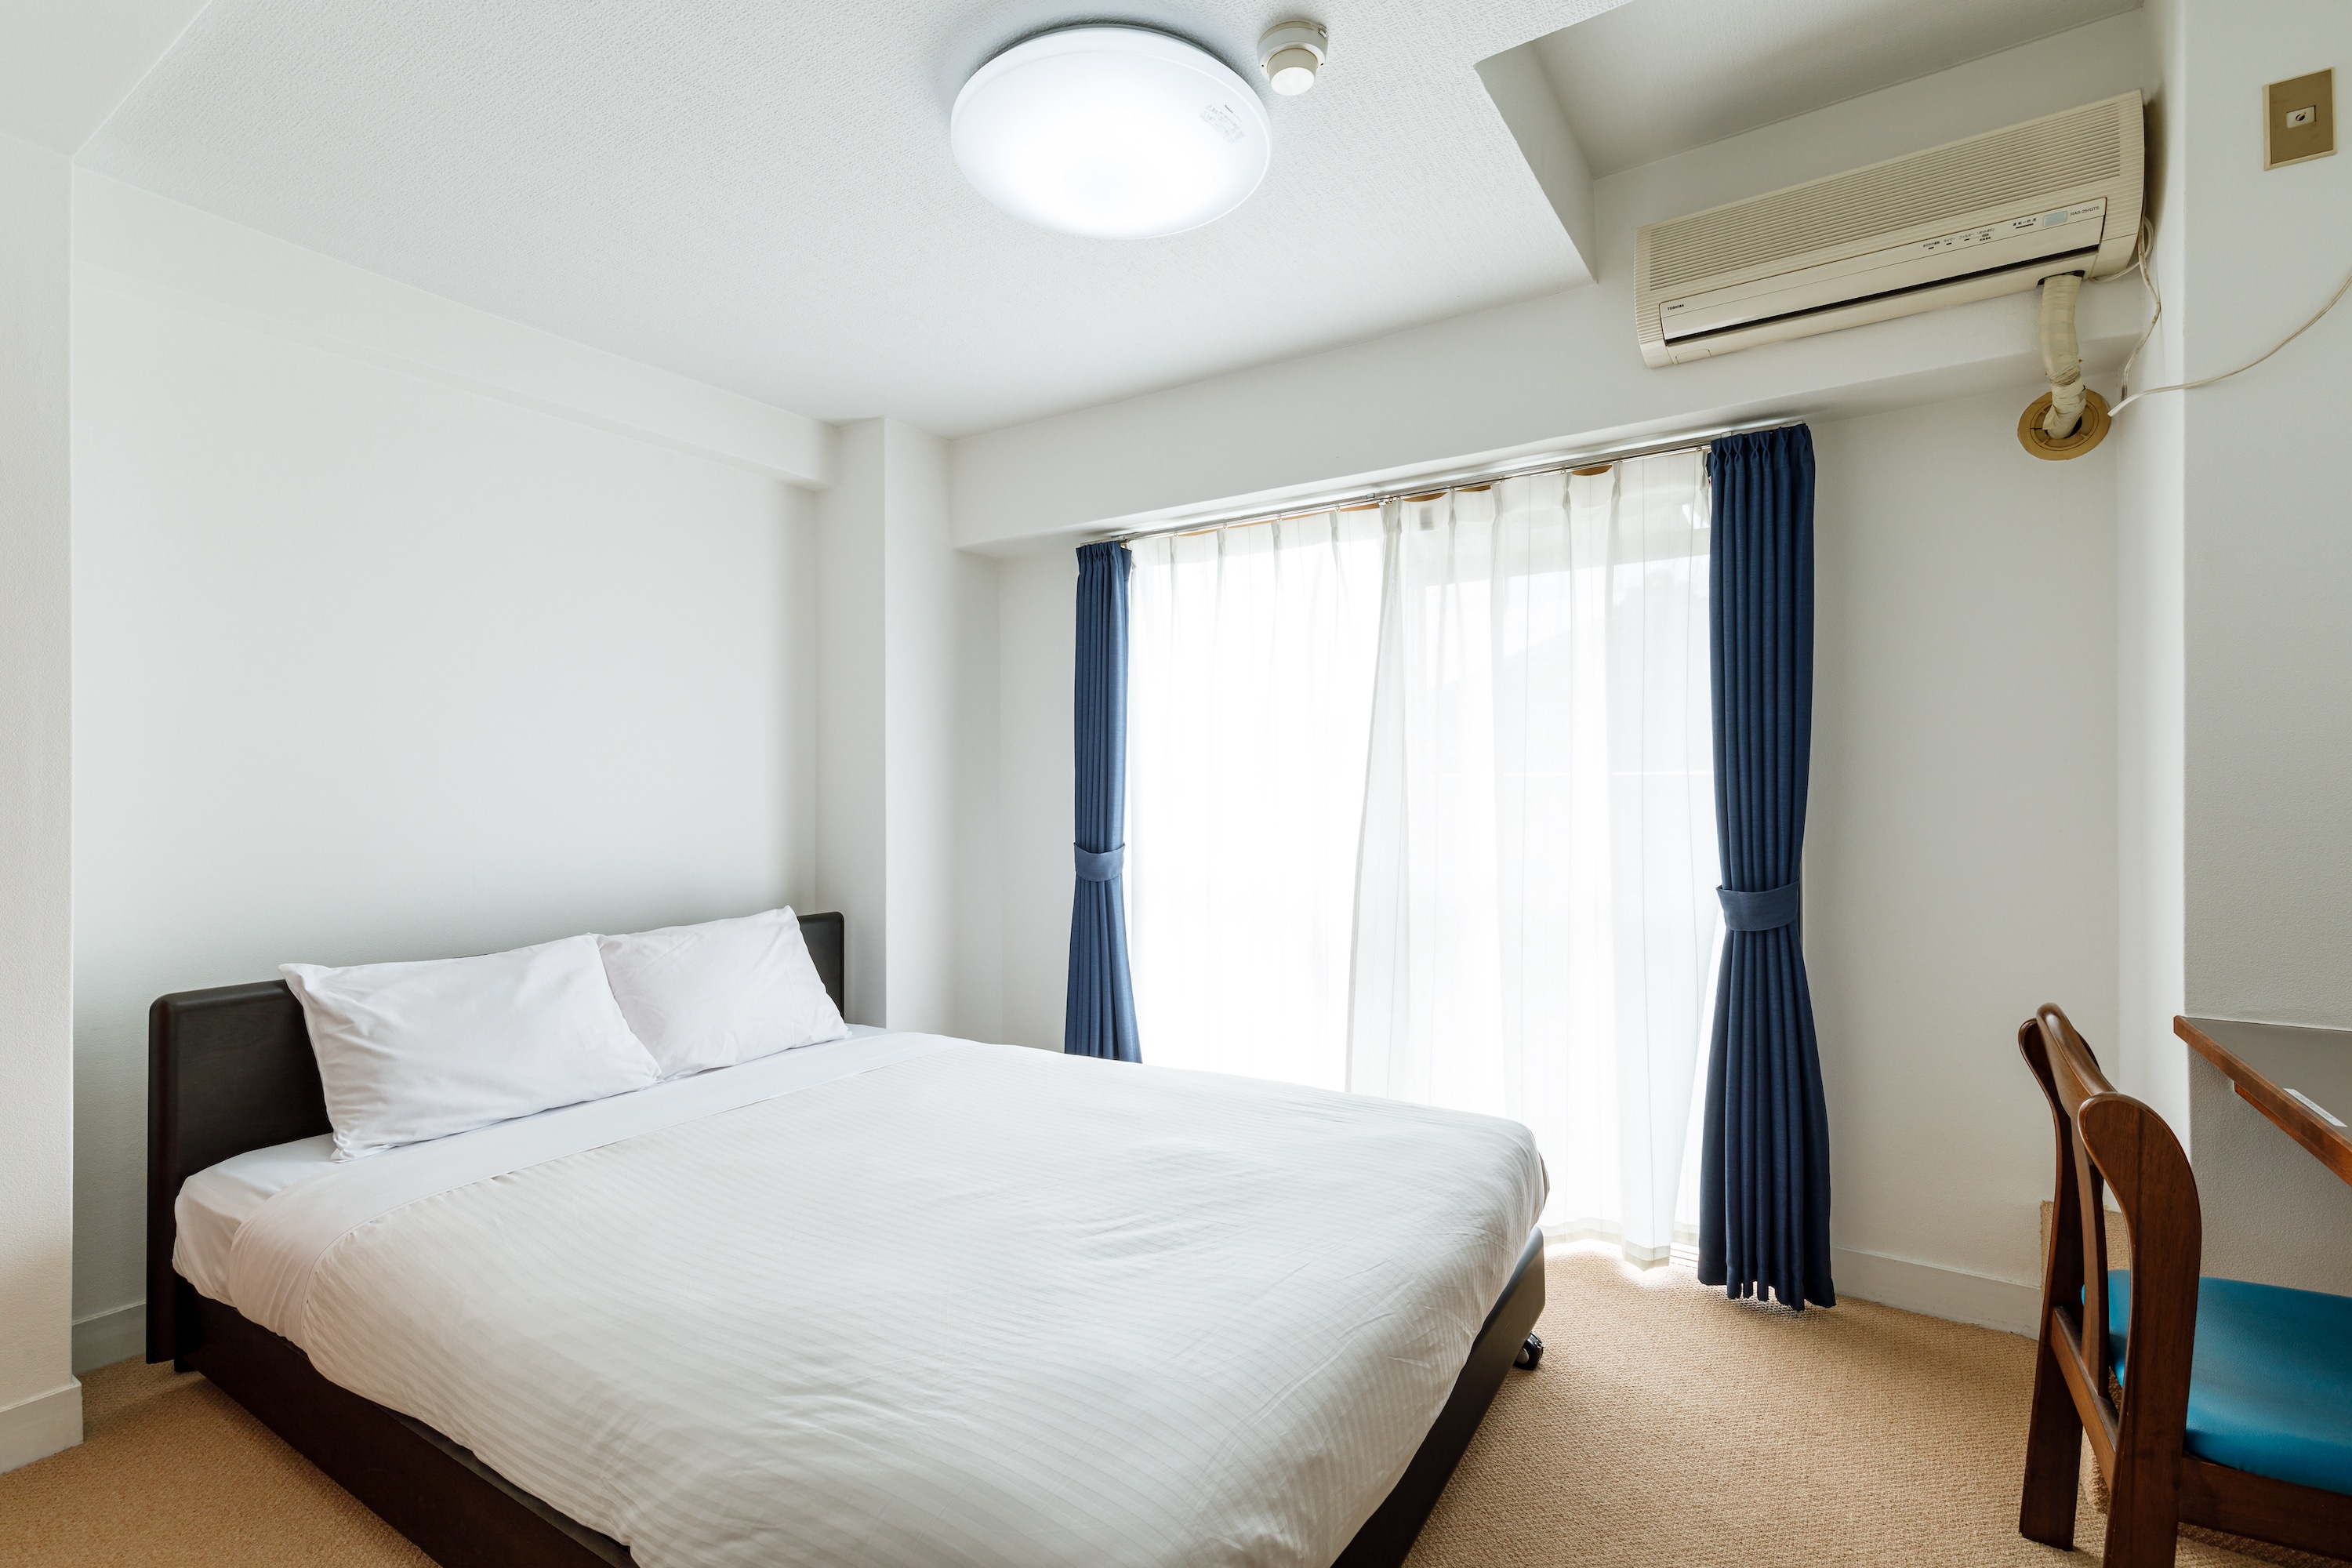 [Guest rooms] Double room / All rooms are non-smoking / Spacious 19 square meters / All rooms have separate bath and toilet / Recommended for 2 people!